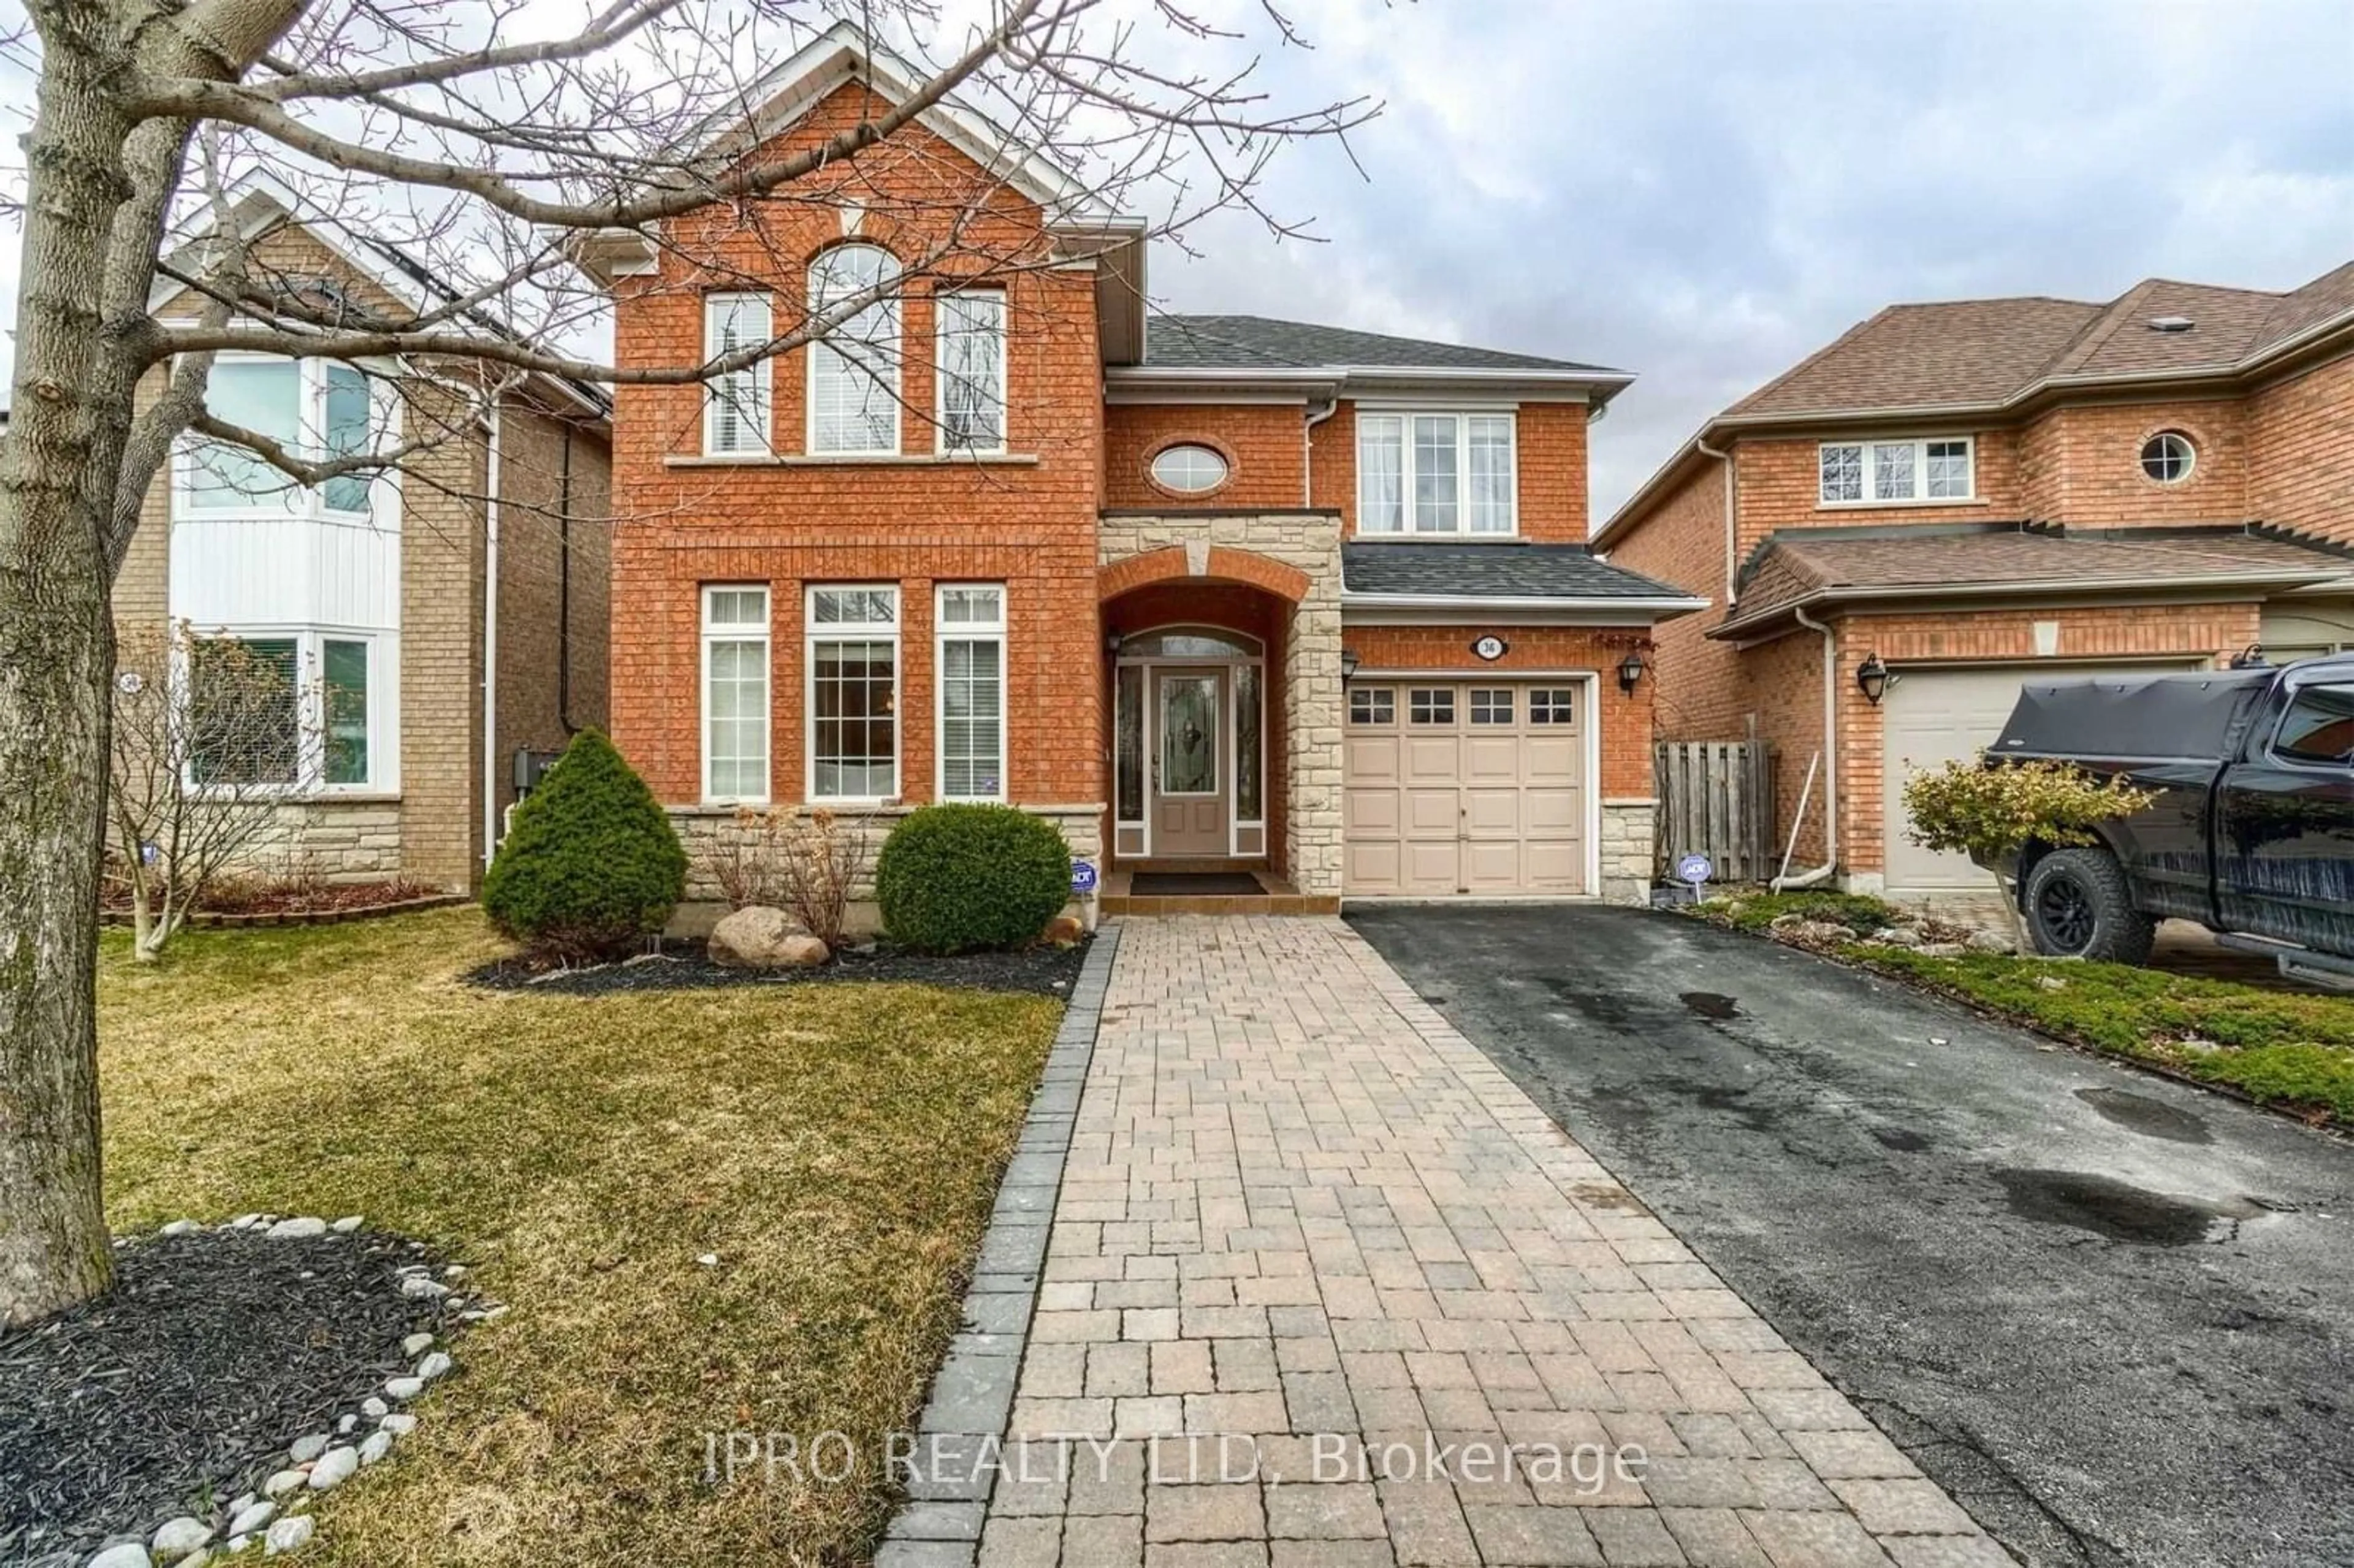 Home with brick exterior material for 36 Brambirch Cres, Brampton Ontario L7A 1V1